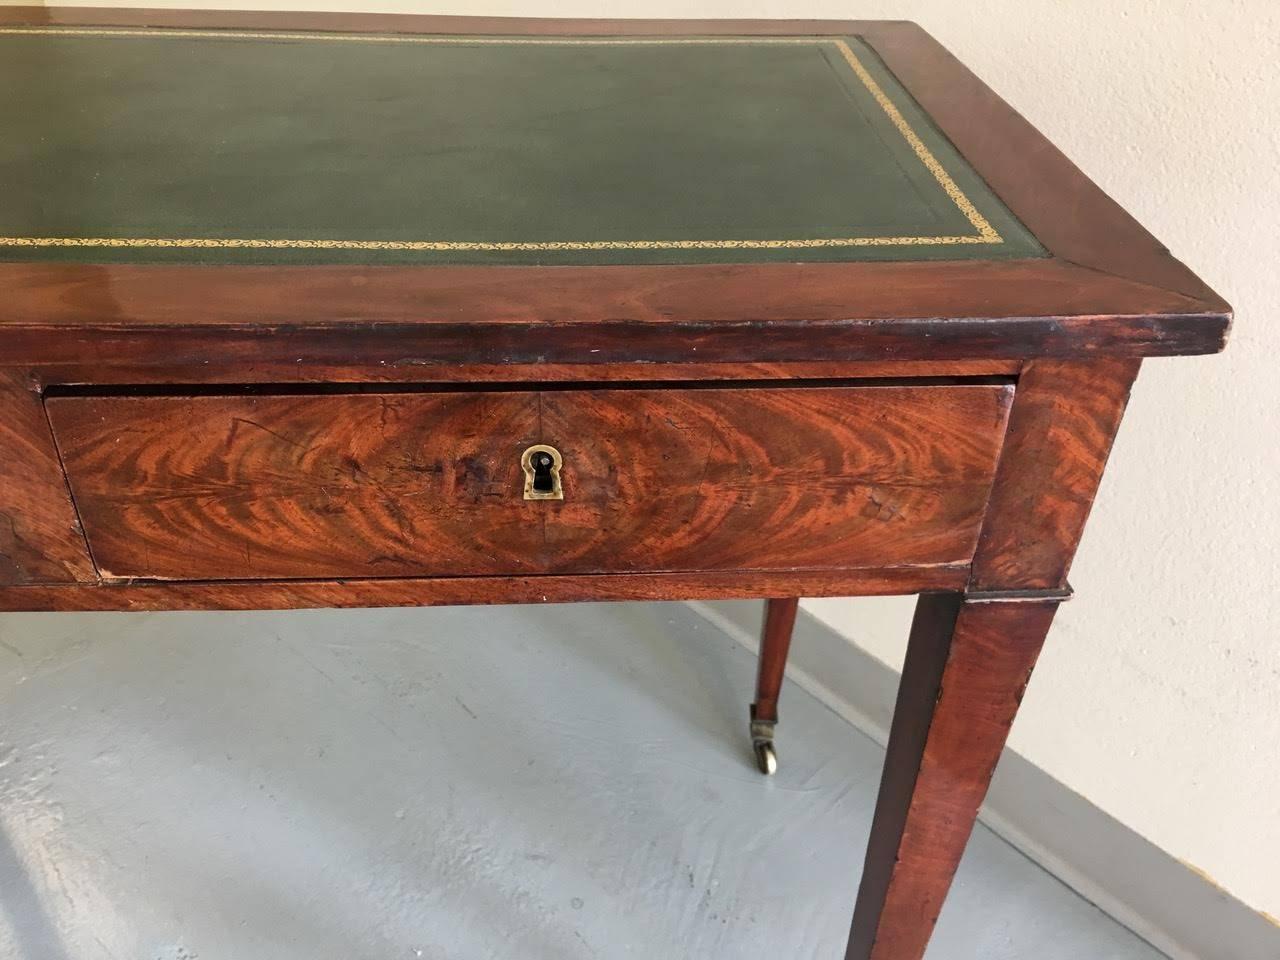 Description exceptional writing table made in England Circa 1820
Flame crotch mahogany with hunter green leather top and brass feet. Mitered top corners and two drawers. 
High gloss French polish finish.
No Key 

Dimensions; 38.5 inch length, 19.5